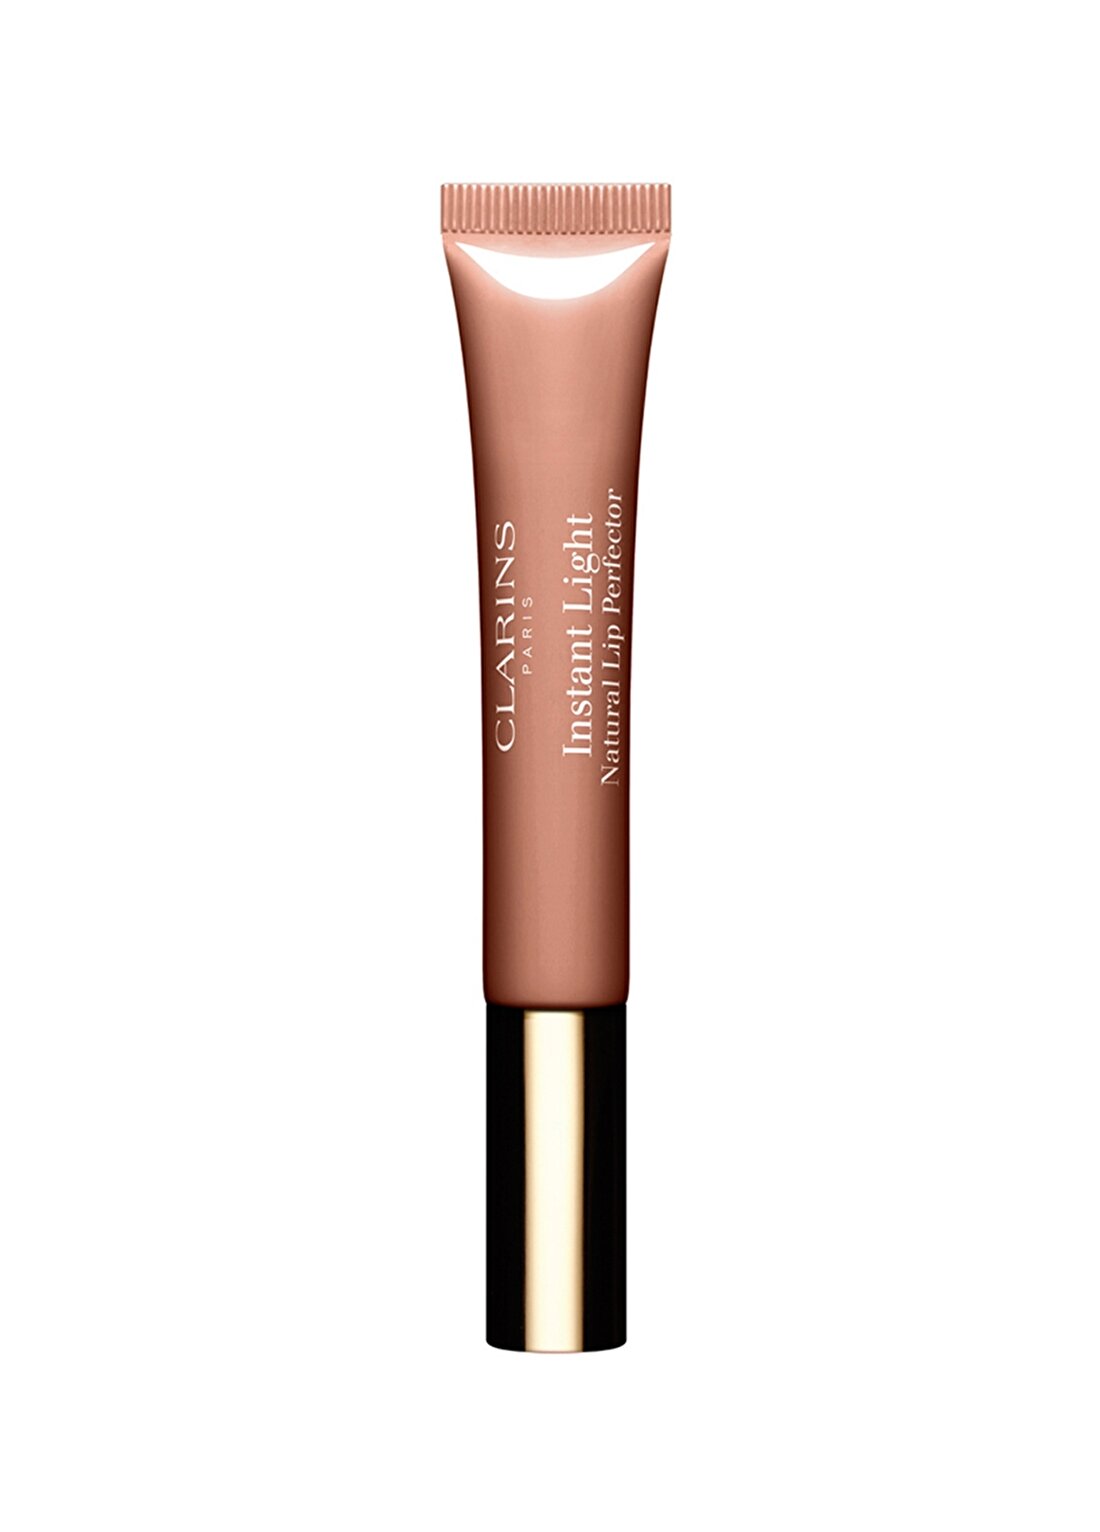 Clarins Instant Light Natural Lip Perfector 06 - Rosewood Shimmer Ruj